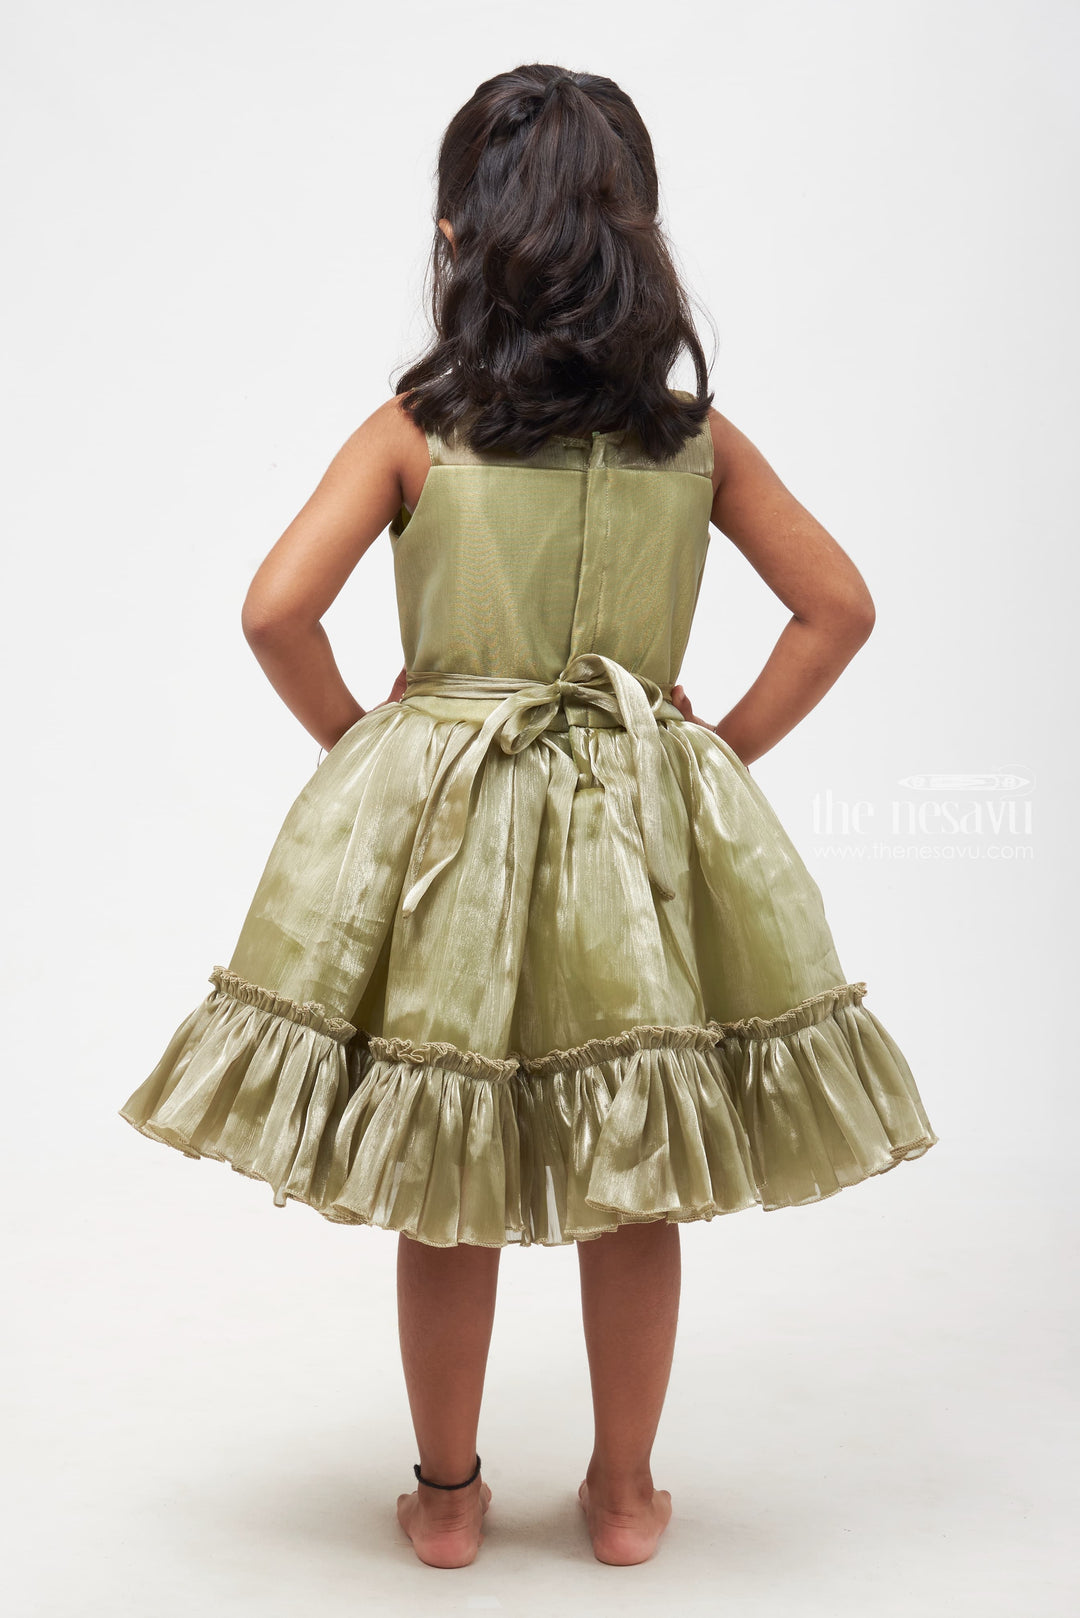 The Nesavu Girls Fancy Party Frock Graceful Olive Green Dress with Floral Embellishment for Girls Nesavu Green Dress with Floral Accent & Tiered Skirt - Elegant Wear for Young Girls | Girls Party wear Frock for Girls | The Nesavu